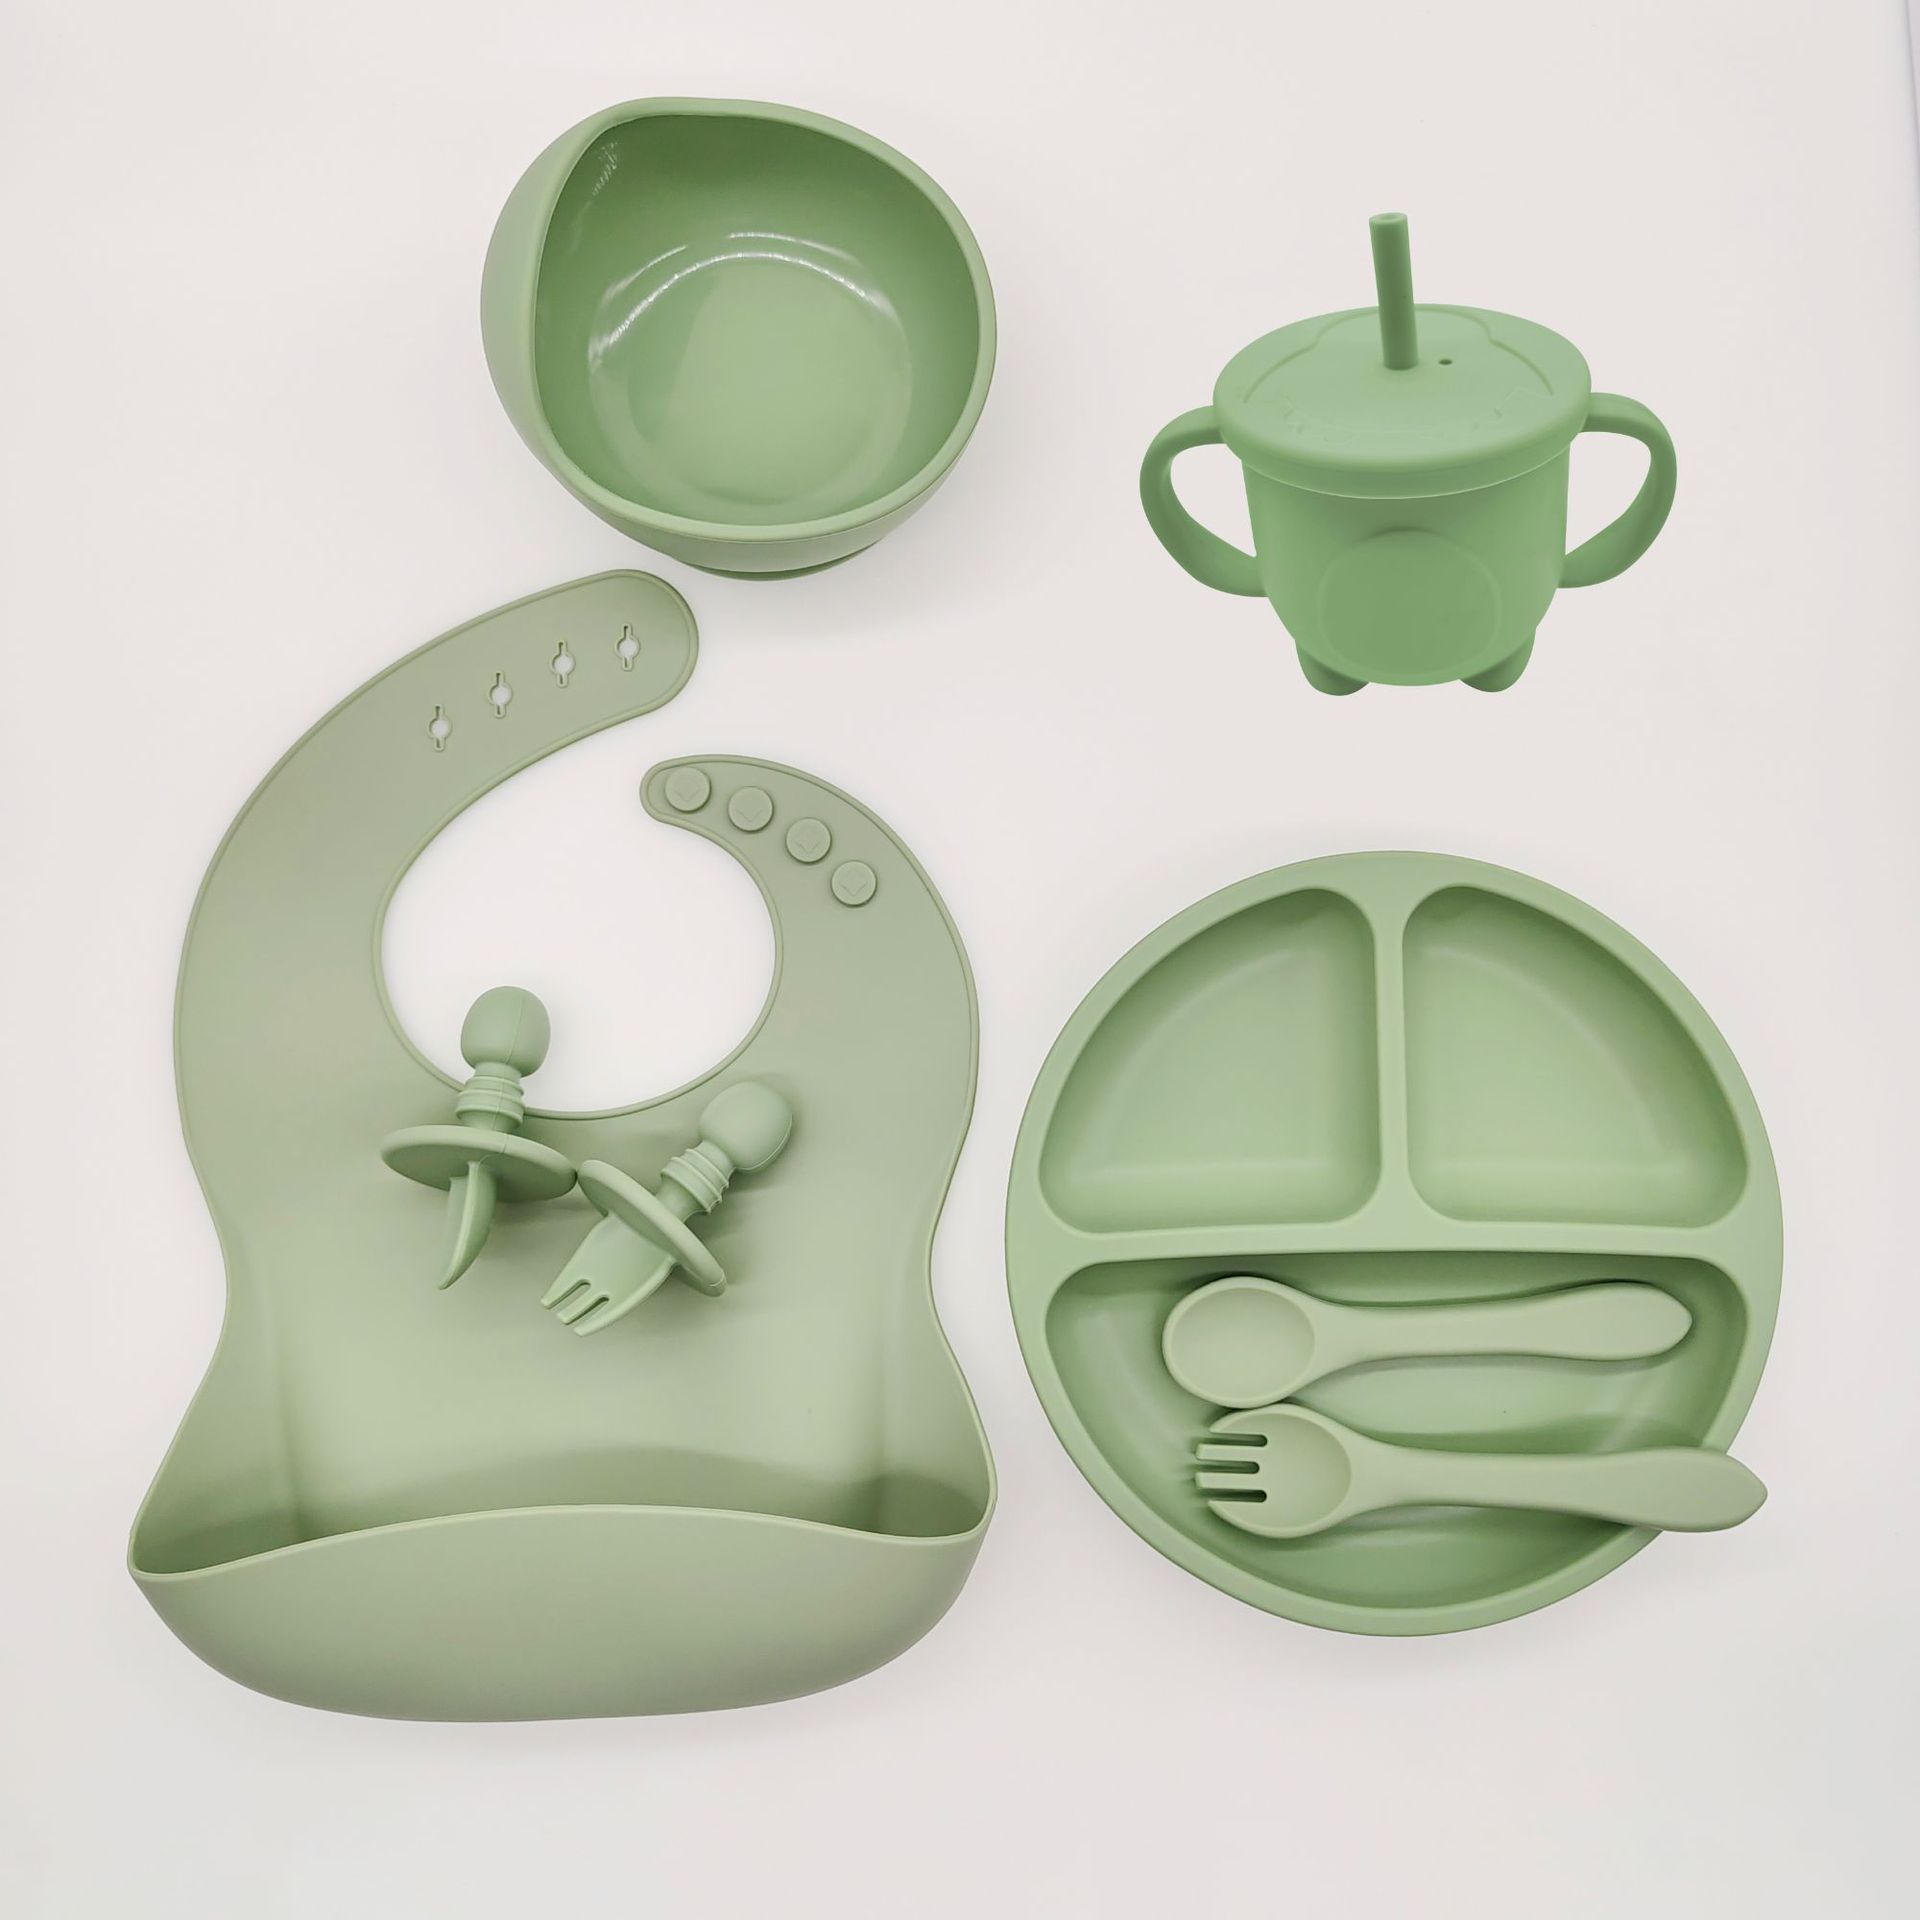 2022 Hot Selling 9 Piece Silicone Tableware Set with Plate Crater Cup Cochlear Fork Crater Bib for Toddler infants and Kids